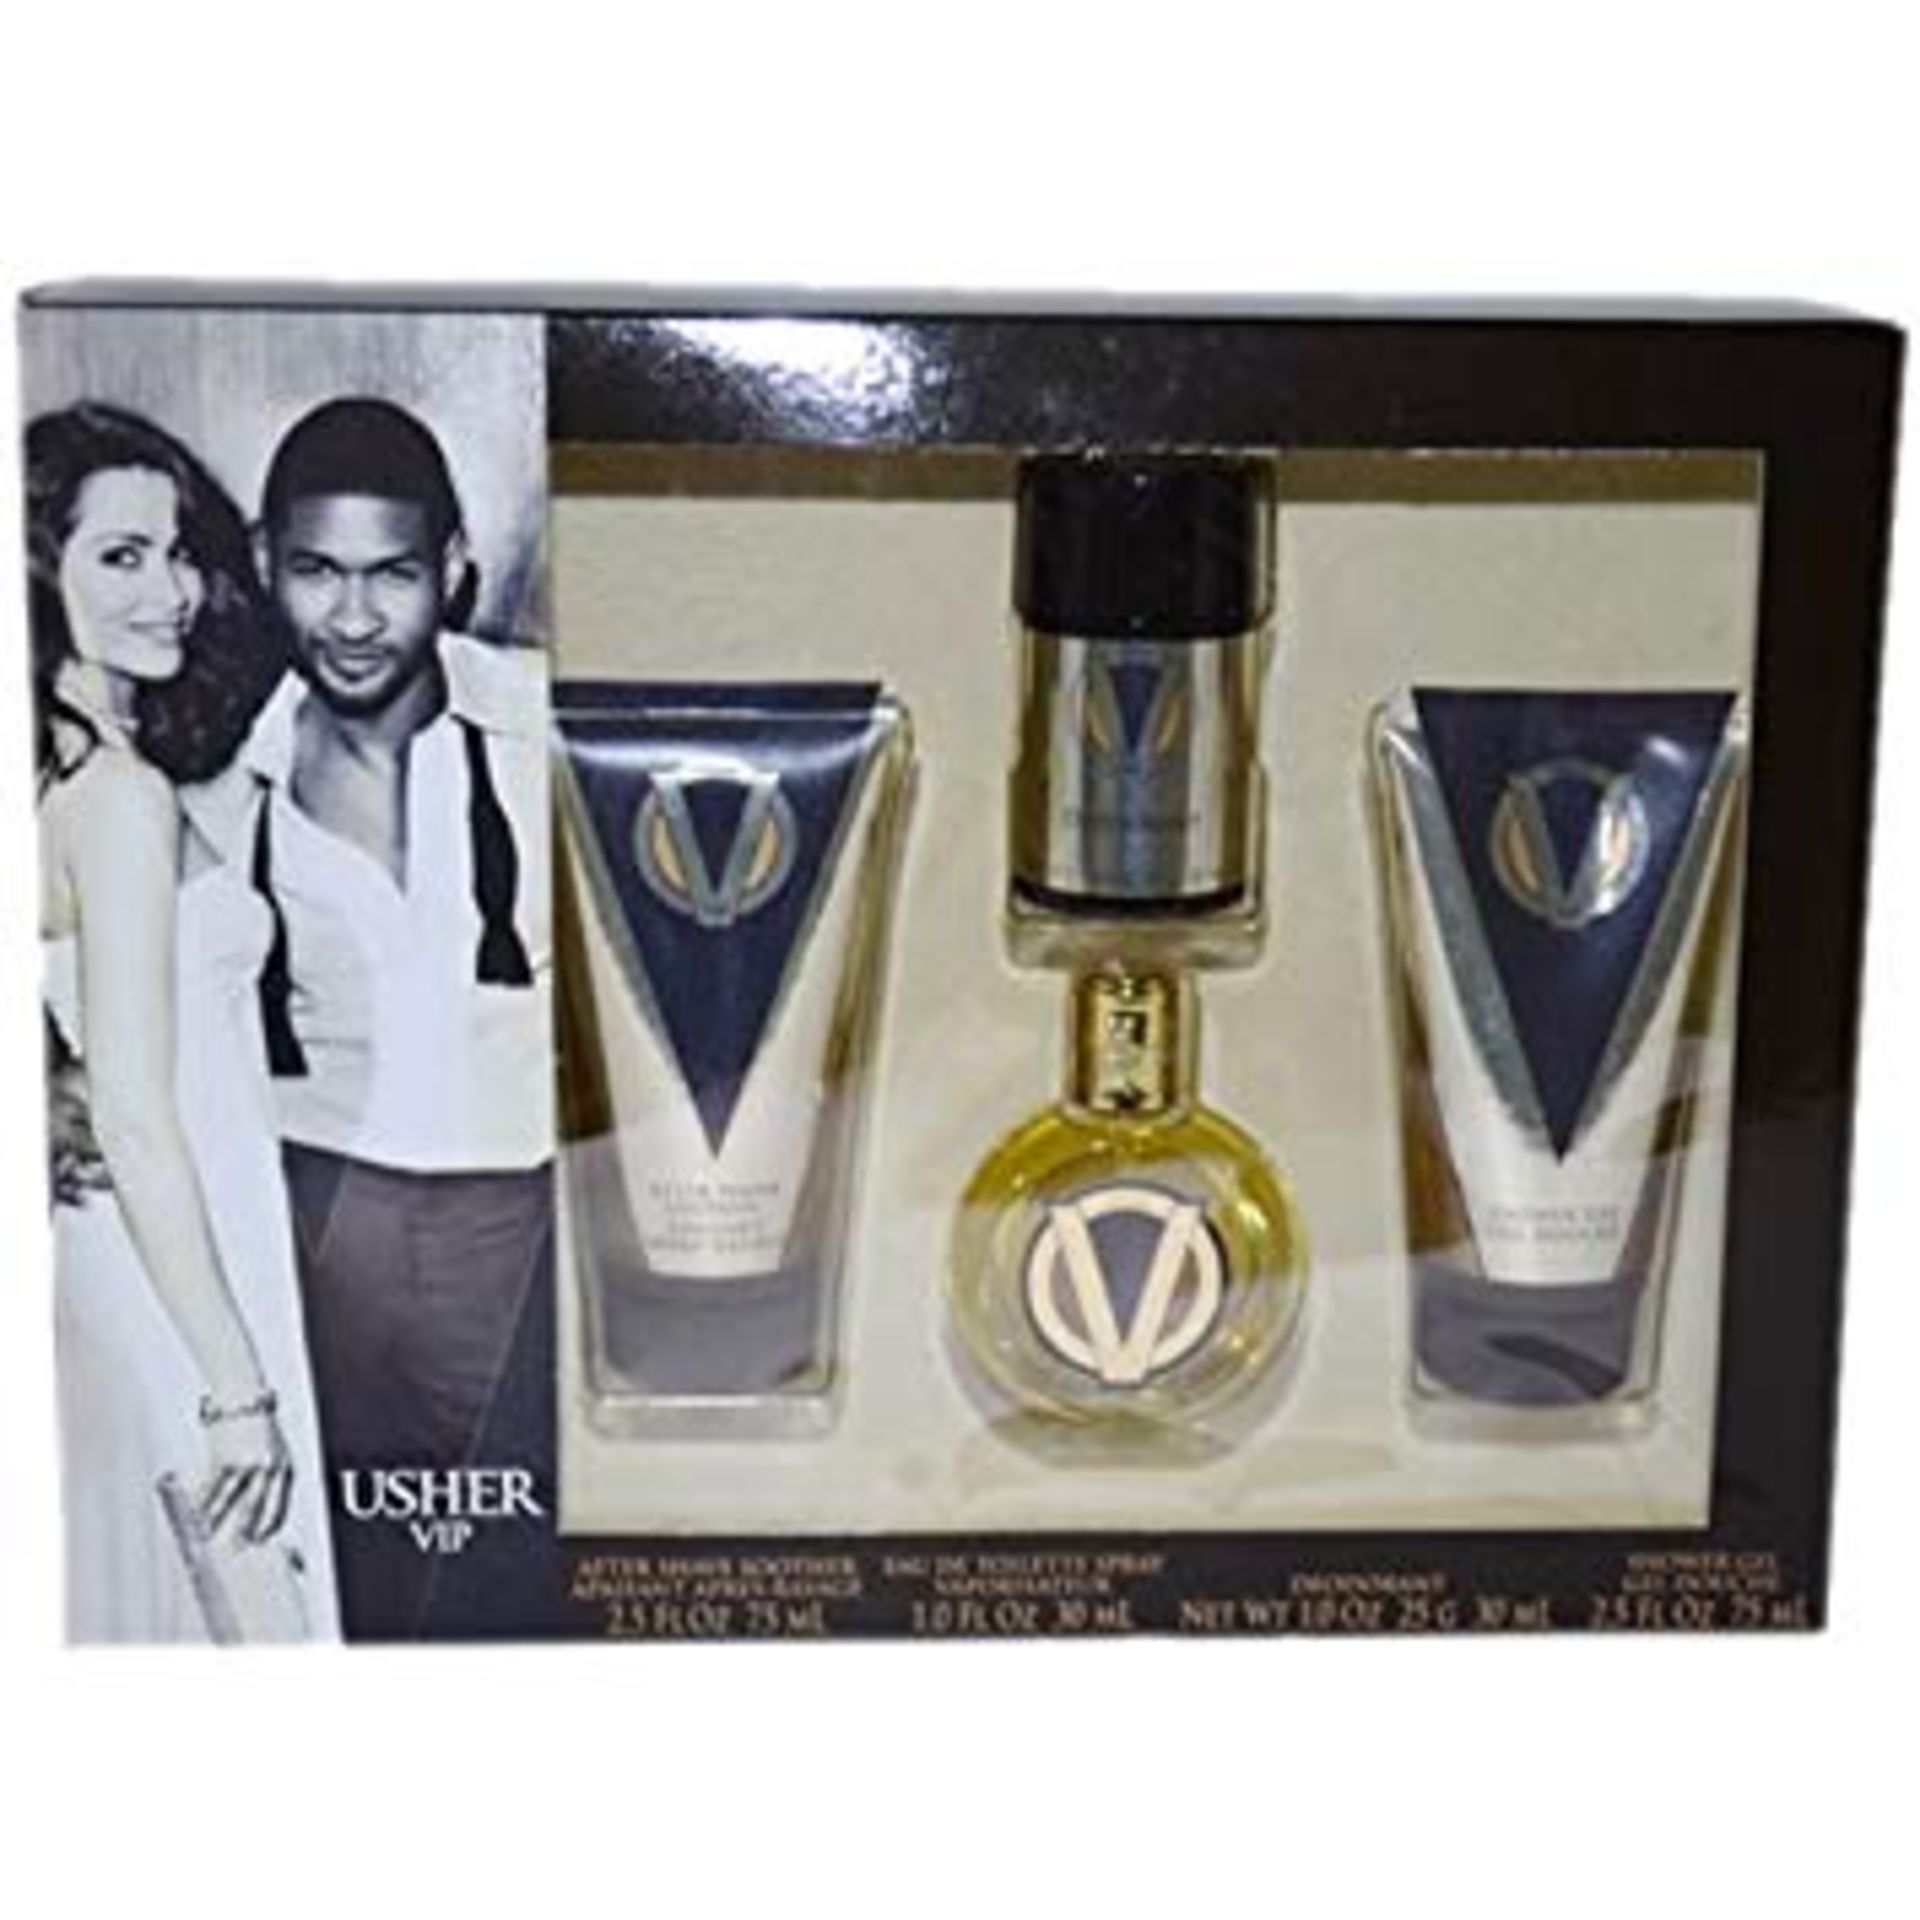 + VAT Brand New Usher VIP 4pce Gift Set Including 75ml Aftershave Soother-30ml Eau De Toilette-30ml